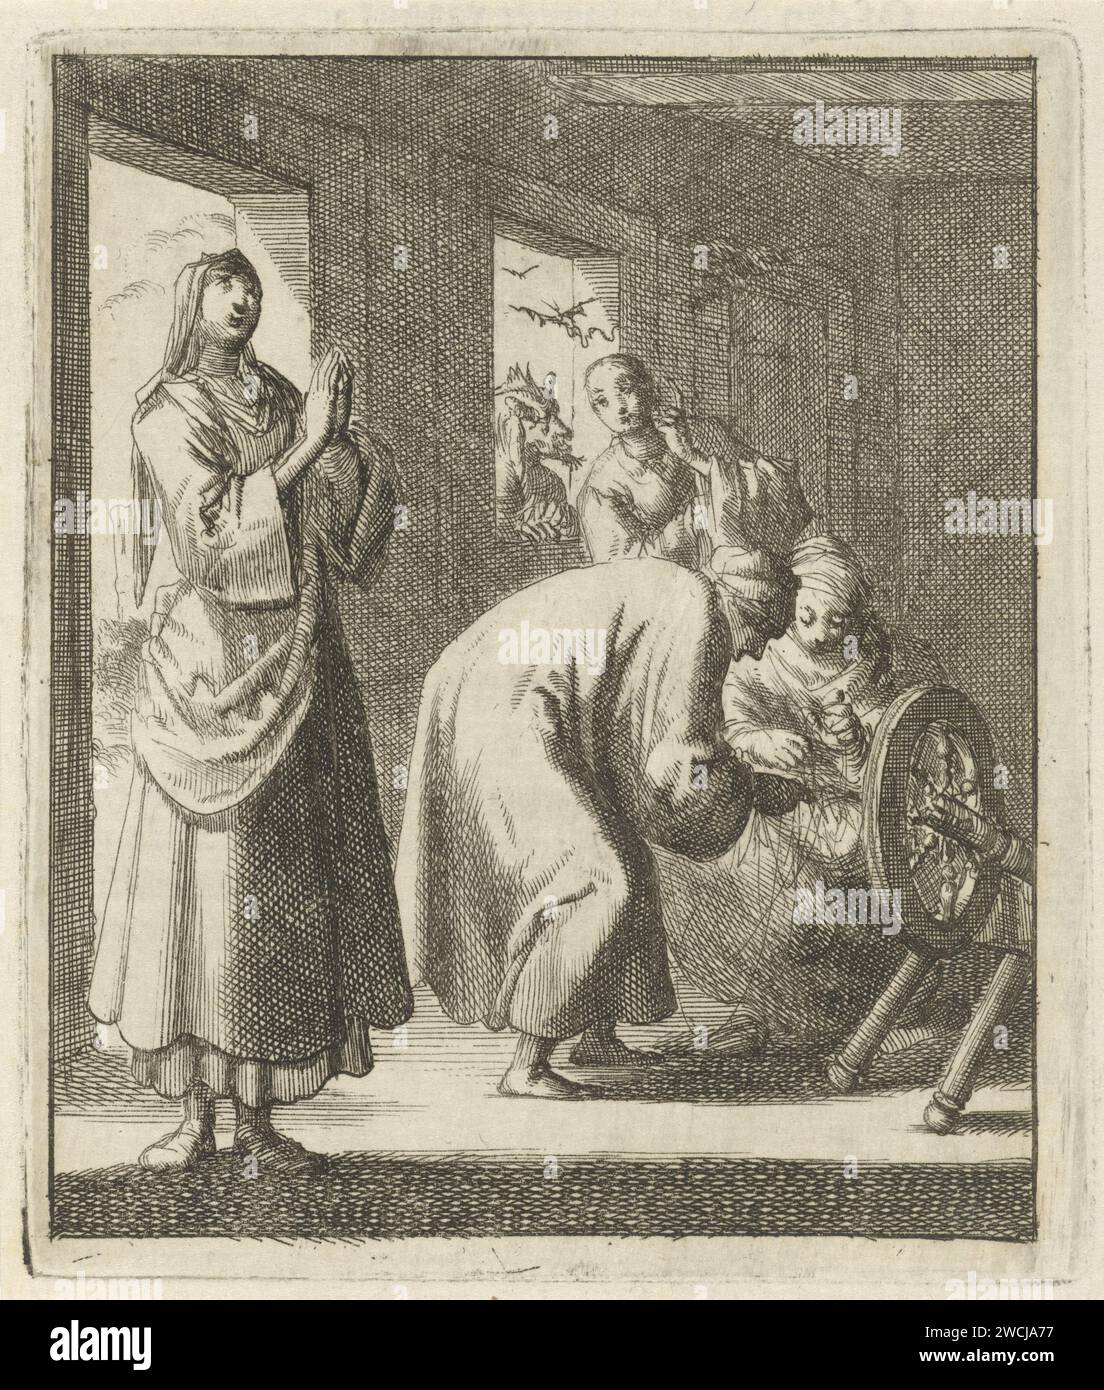 Women praying and spinning in an interior, by the window Satan whispers a fourth woman in the ear, Jan Luyken, 1687 print  Amsterdam paper etching / letterpress printing one person praying. spinning-wheel. devil(s) and demons: Satan Stock Photo